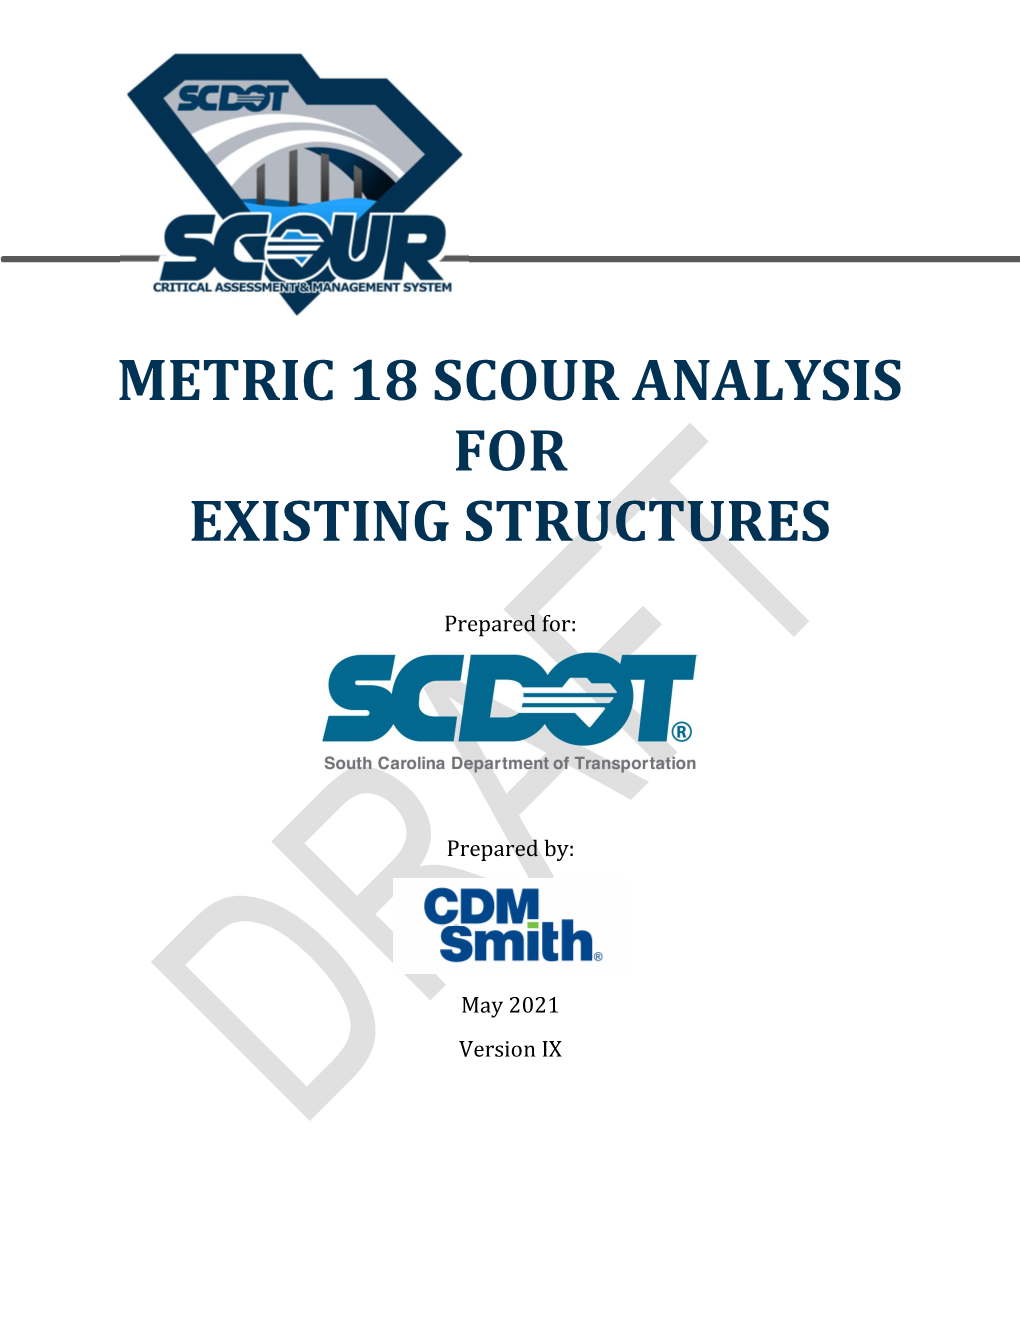 Metric 18 Scour Analysis for Existing Structures